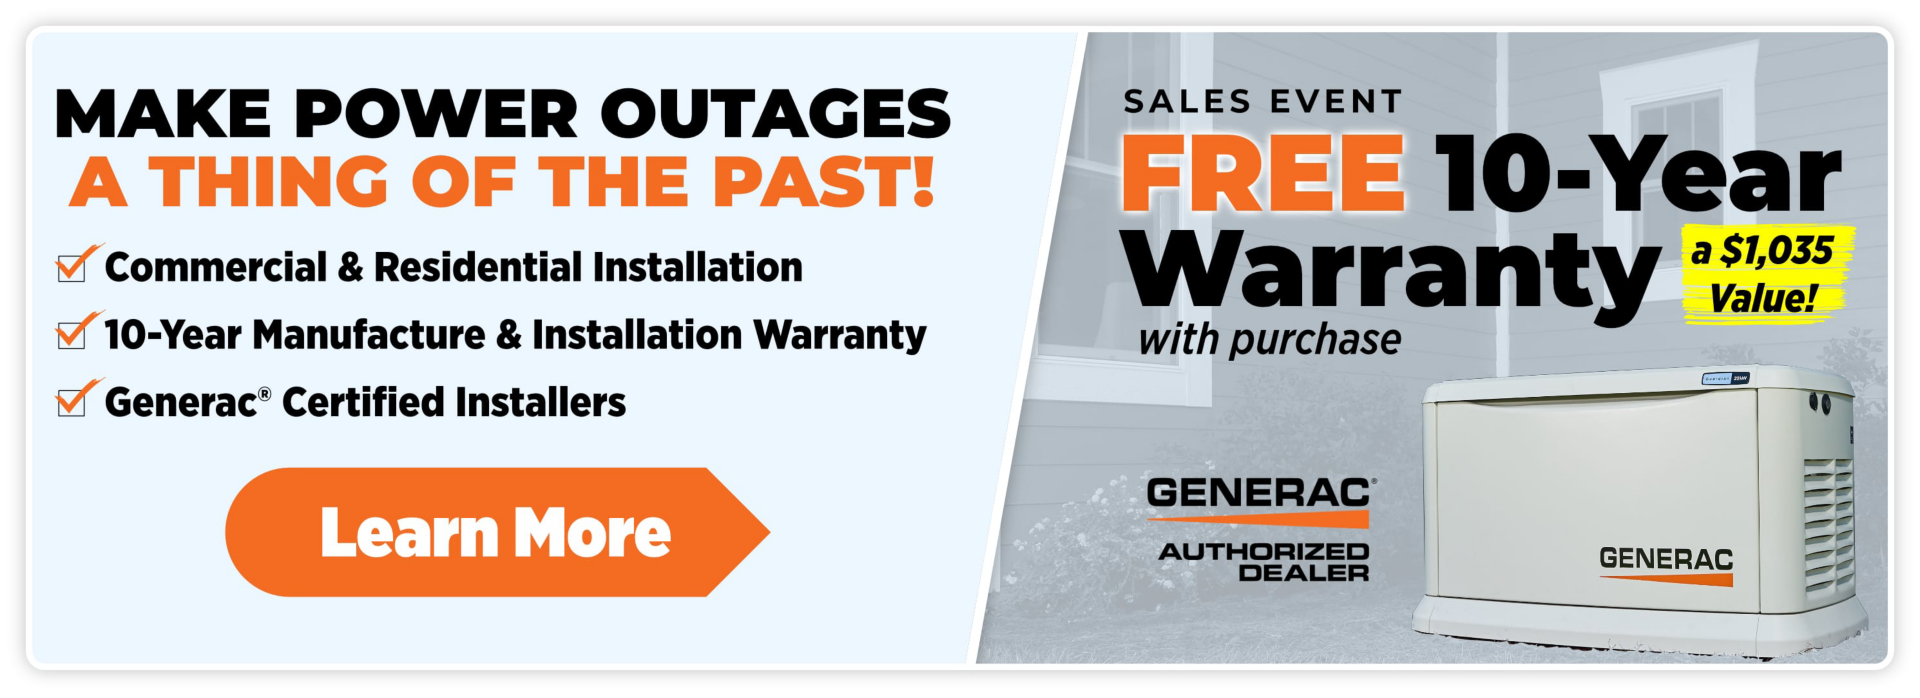 Free 10 Year Warranty on a Whole-Home Backup Generator